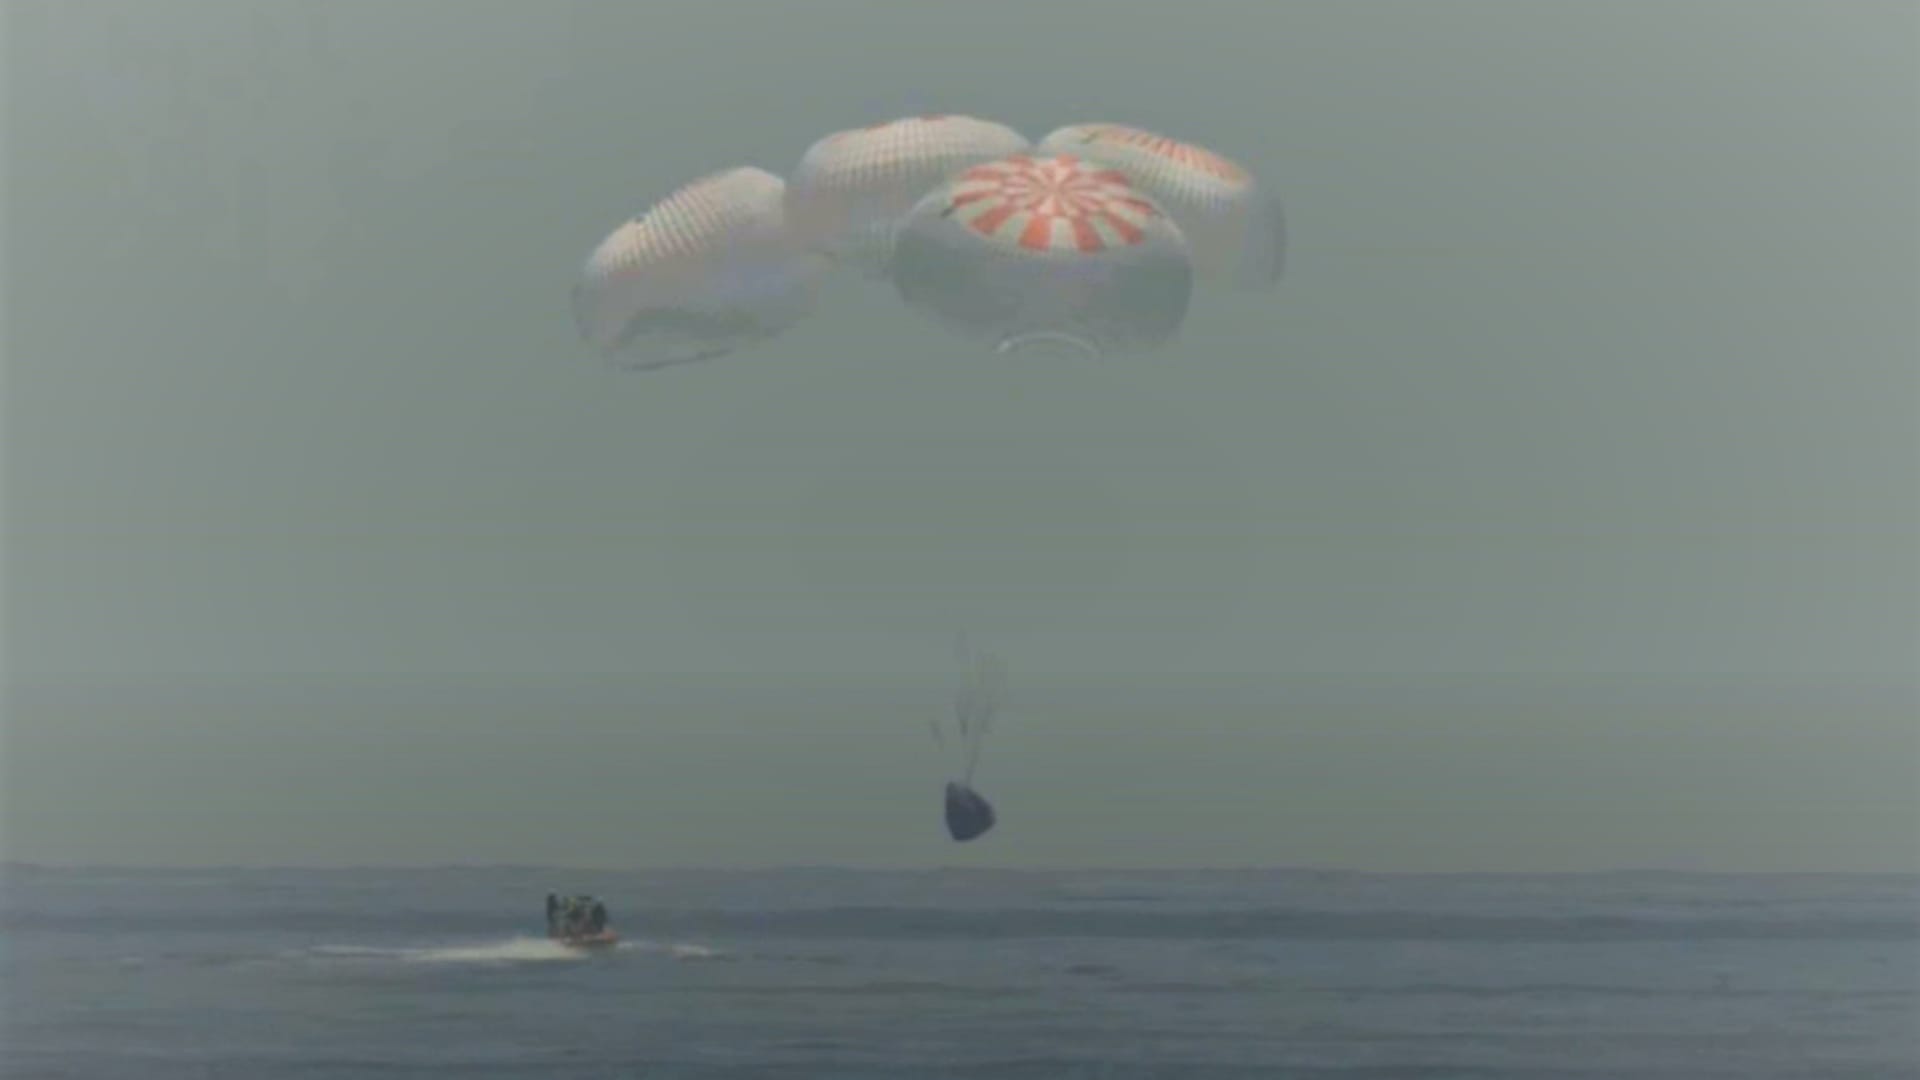 SpaceX's Crew Dragon splashes down in the Gulf of Mexico, completing a historic NASA mission